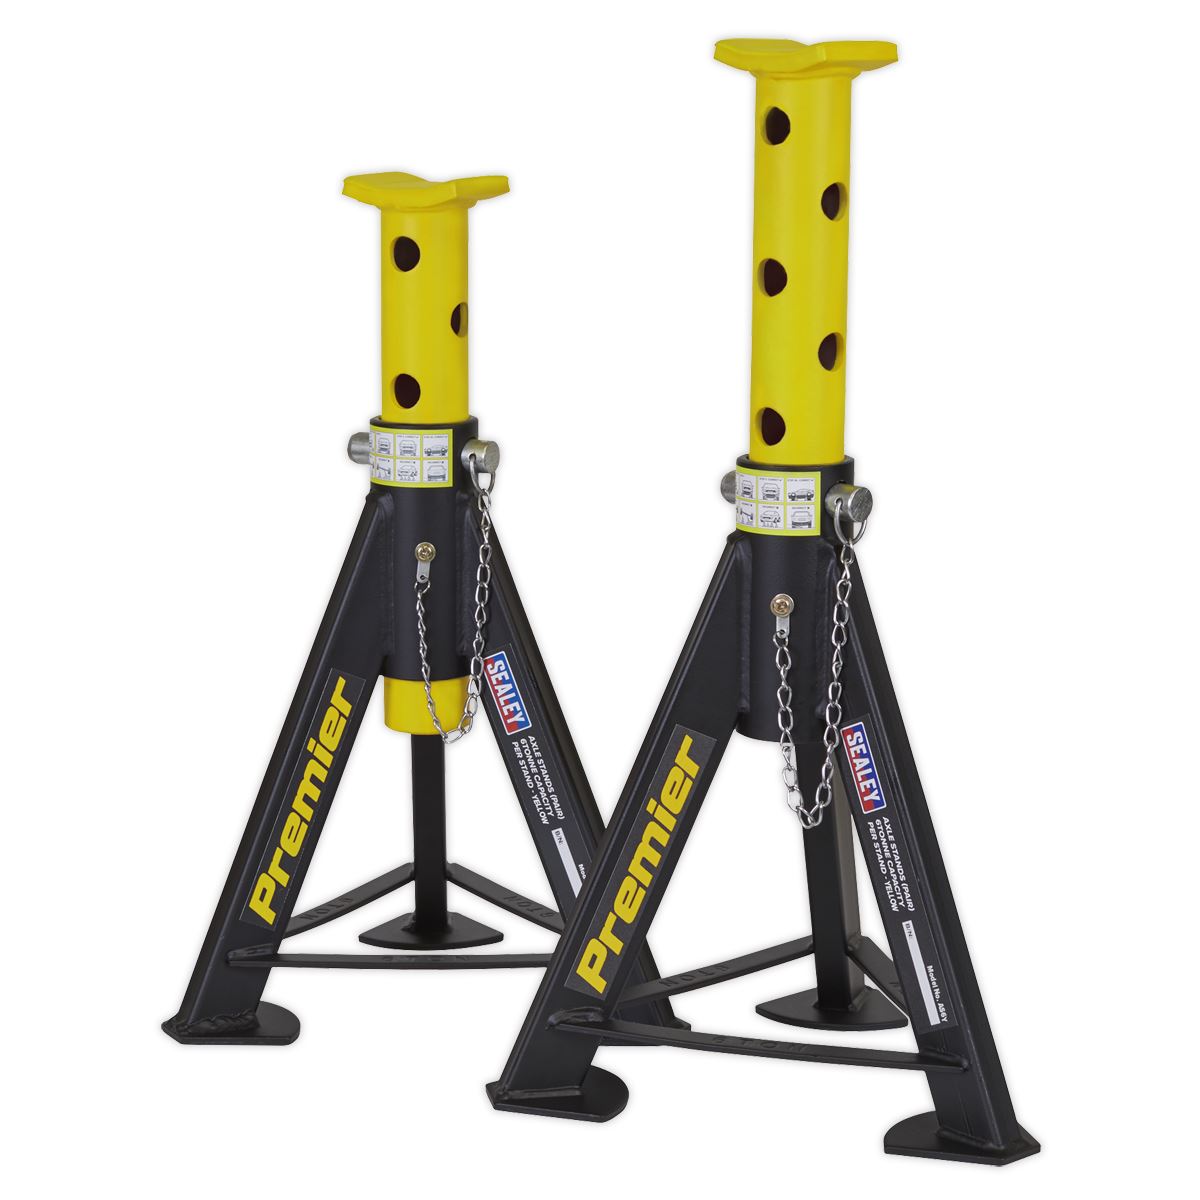 Sealey Premier Premier Axle Stands (Pair) 6 Tonne Capacity per Stand - Yellow